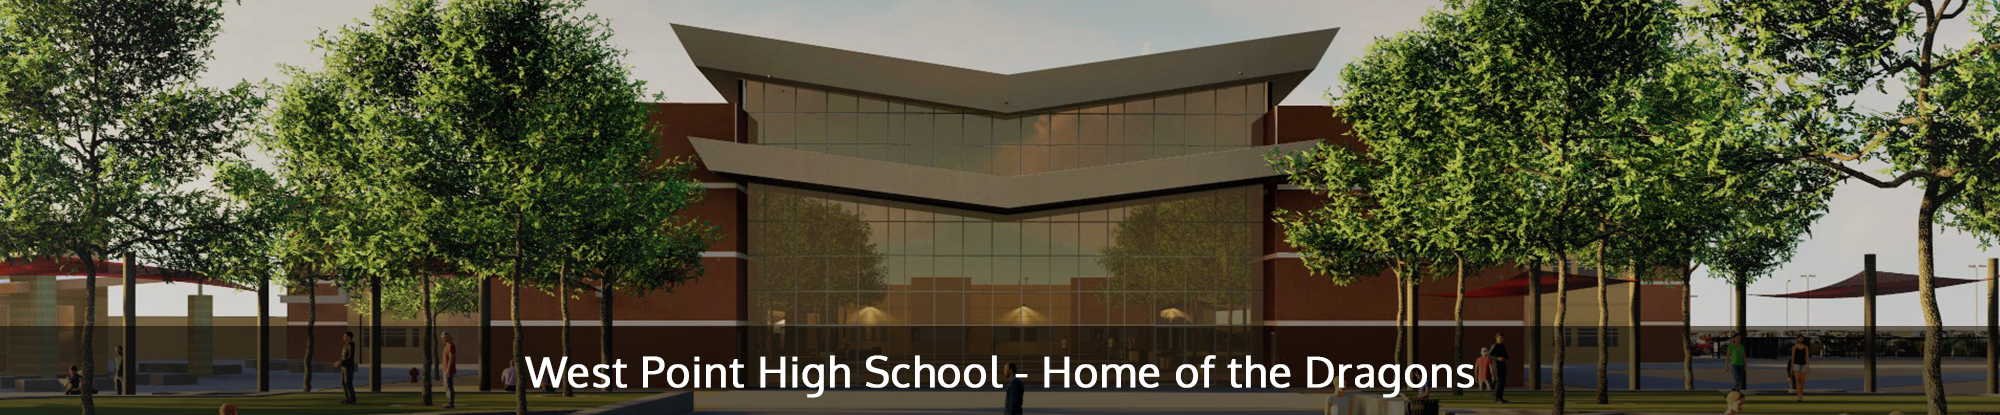 West Point High School - Home of the Dragons - Opening in the Summer of 2019